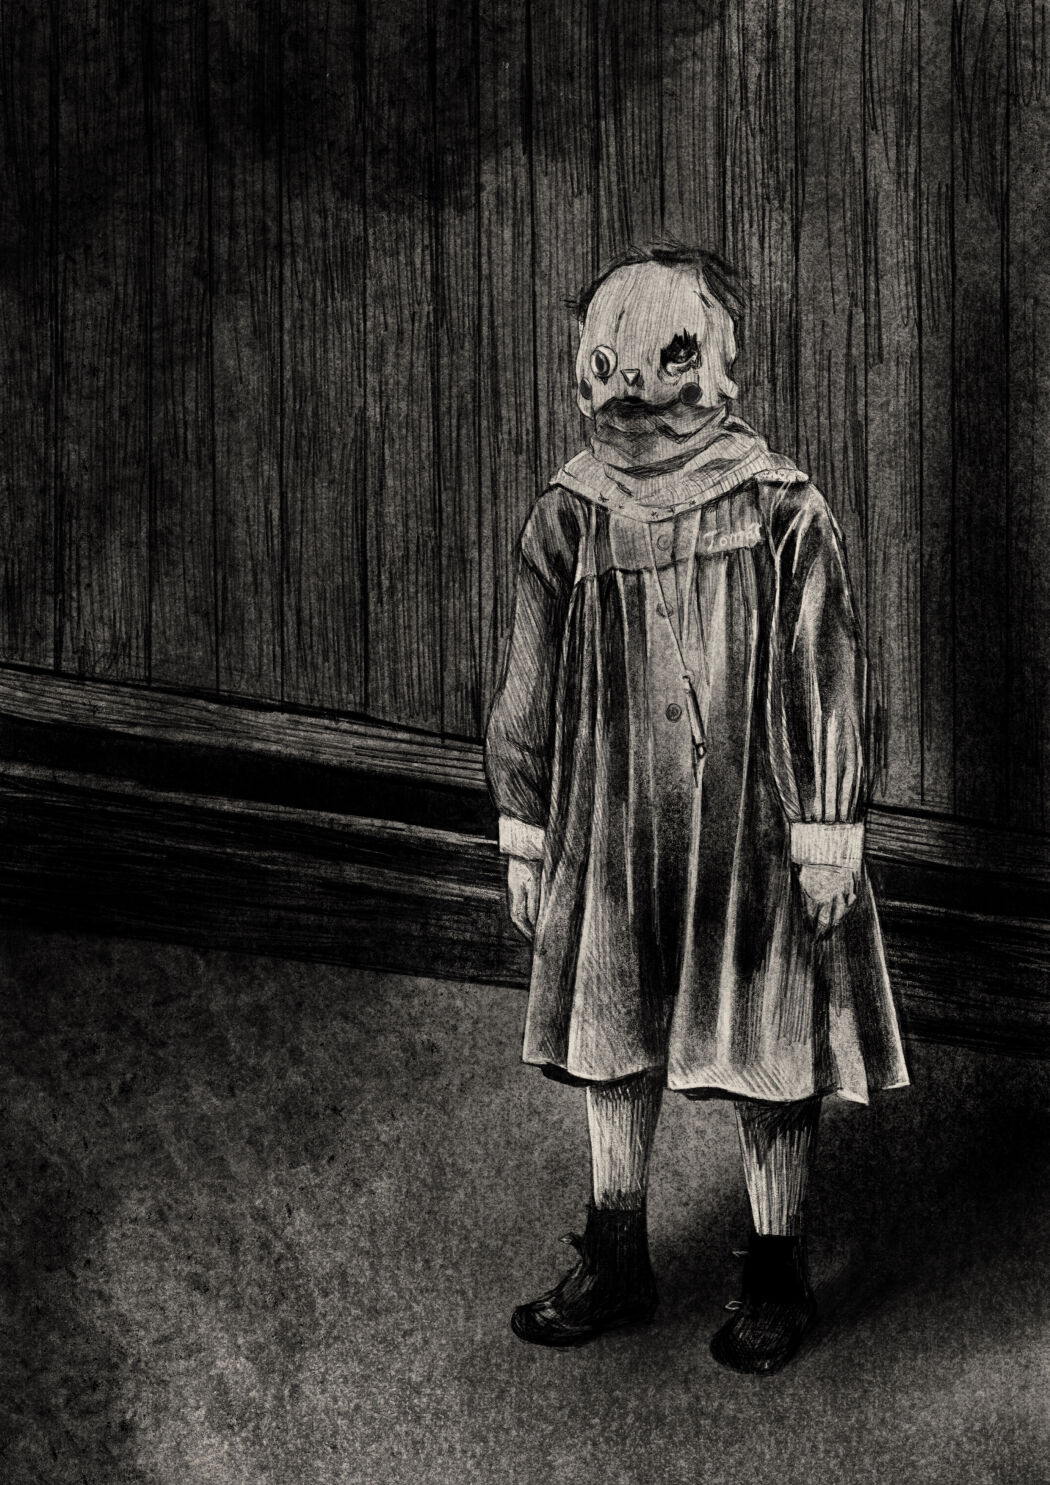 Horror, eerie styled drawing by Eplet